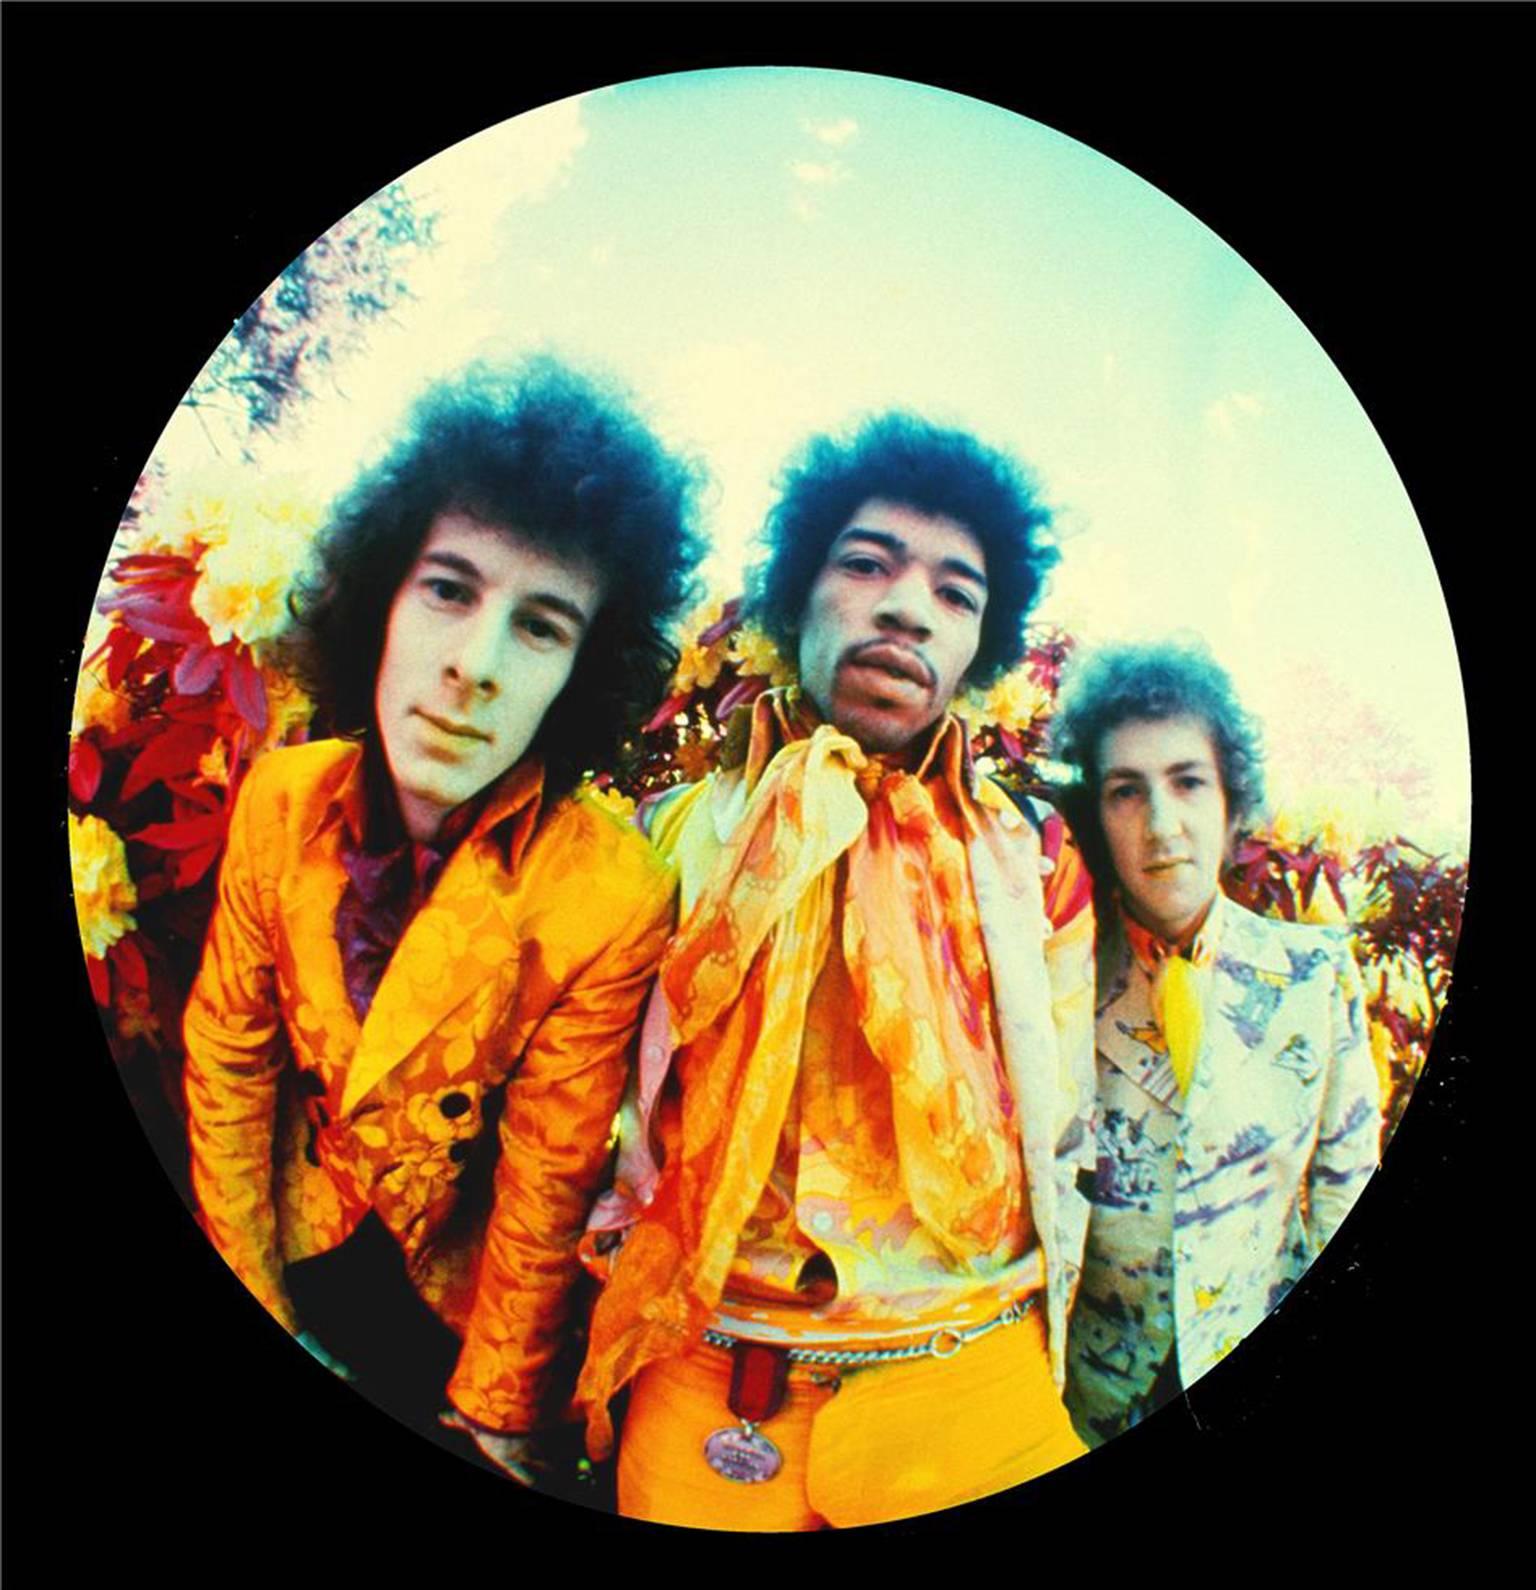 Karl Ferris Abstract Photograph - The Jimi Hendrix Experience, Alternate Album Cover, 1967